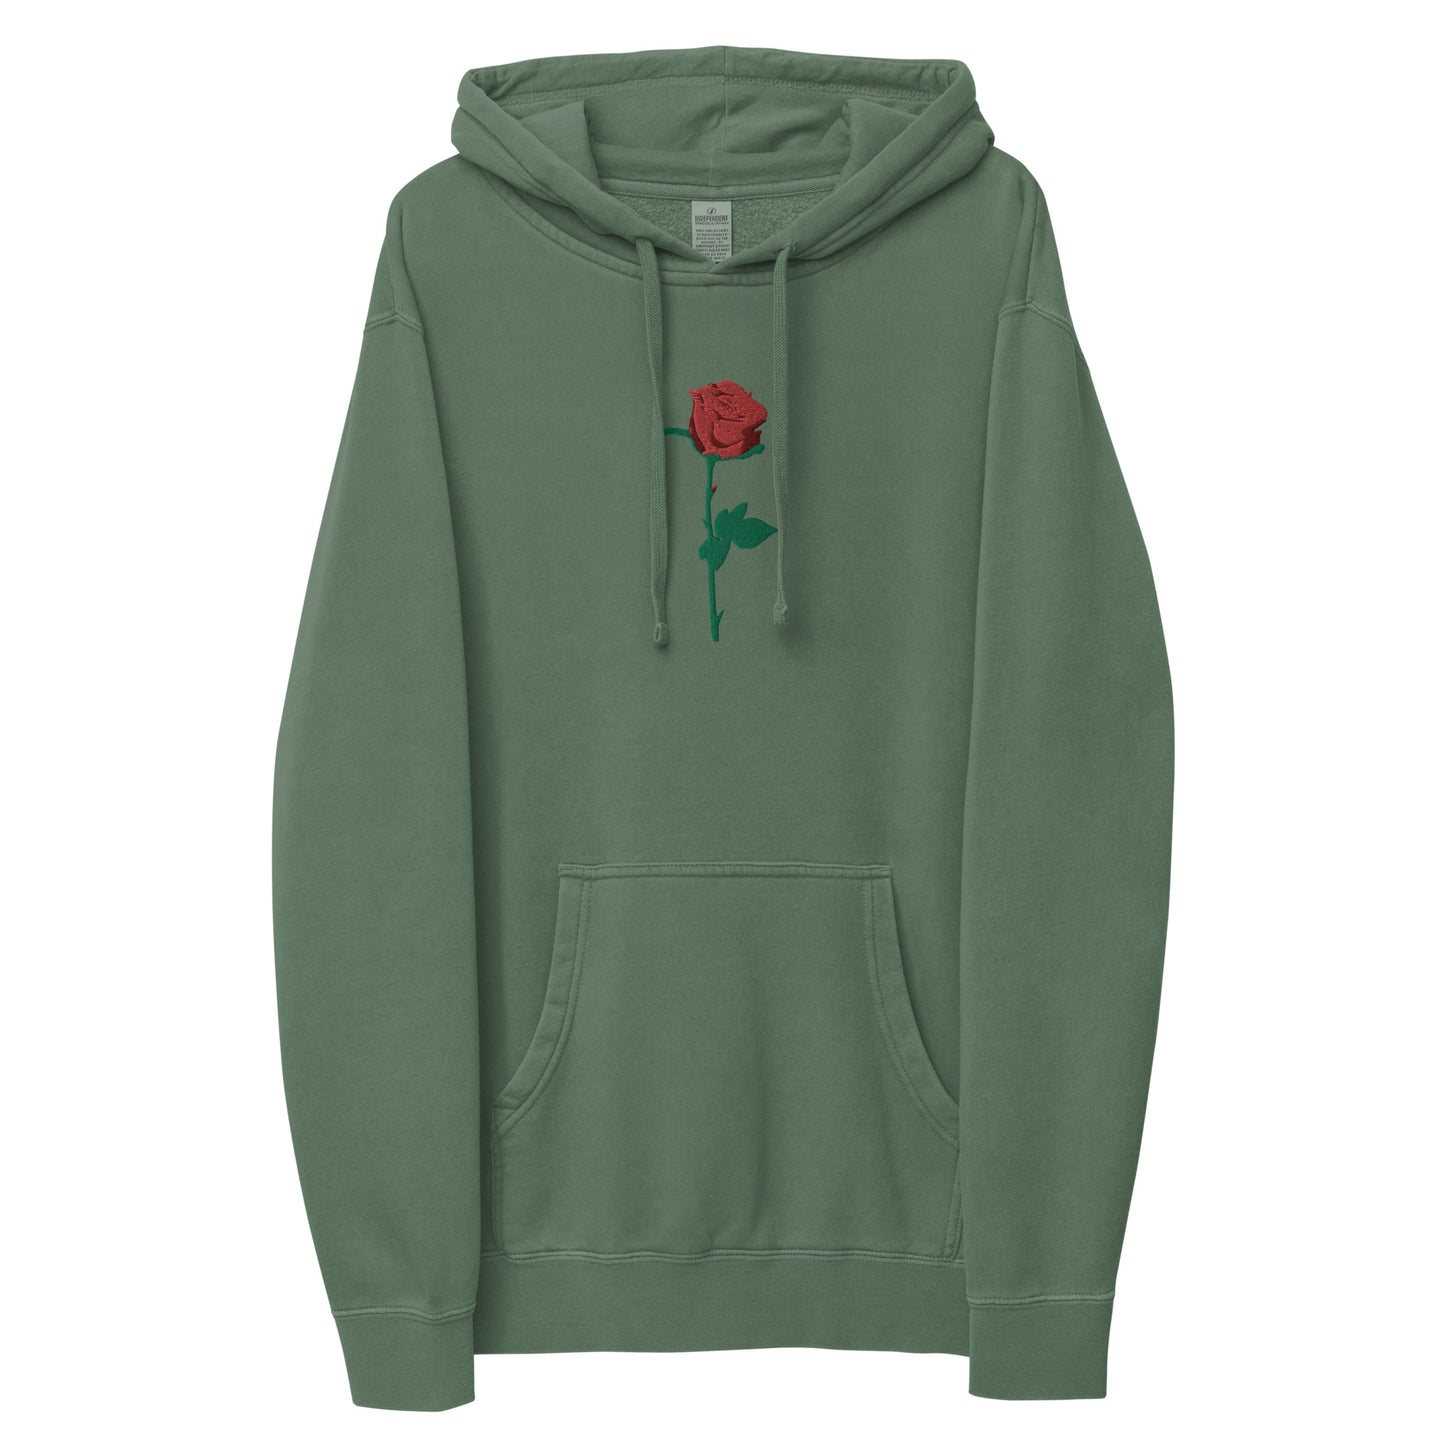 *Front view of hoodie* Embroidered rose logo